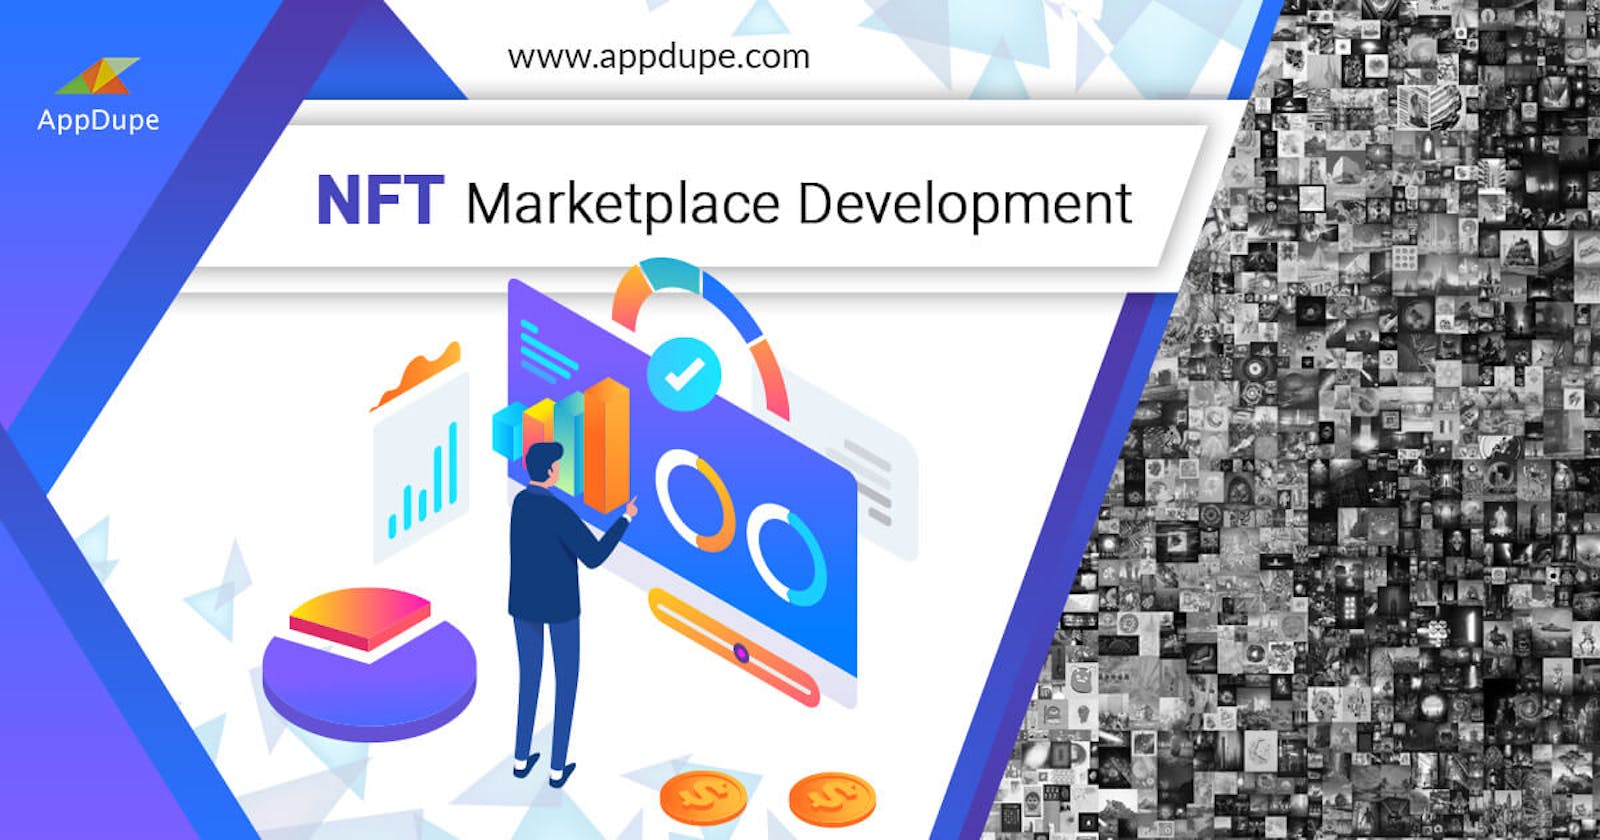 Why create an NFT marketplace in 2022?